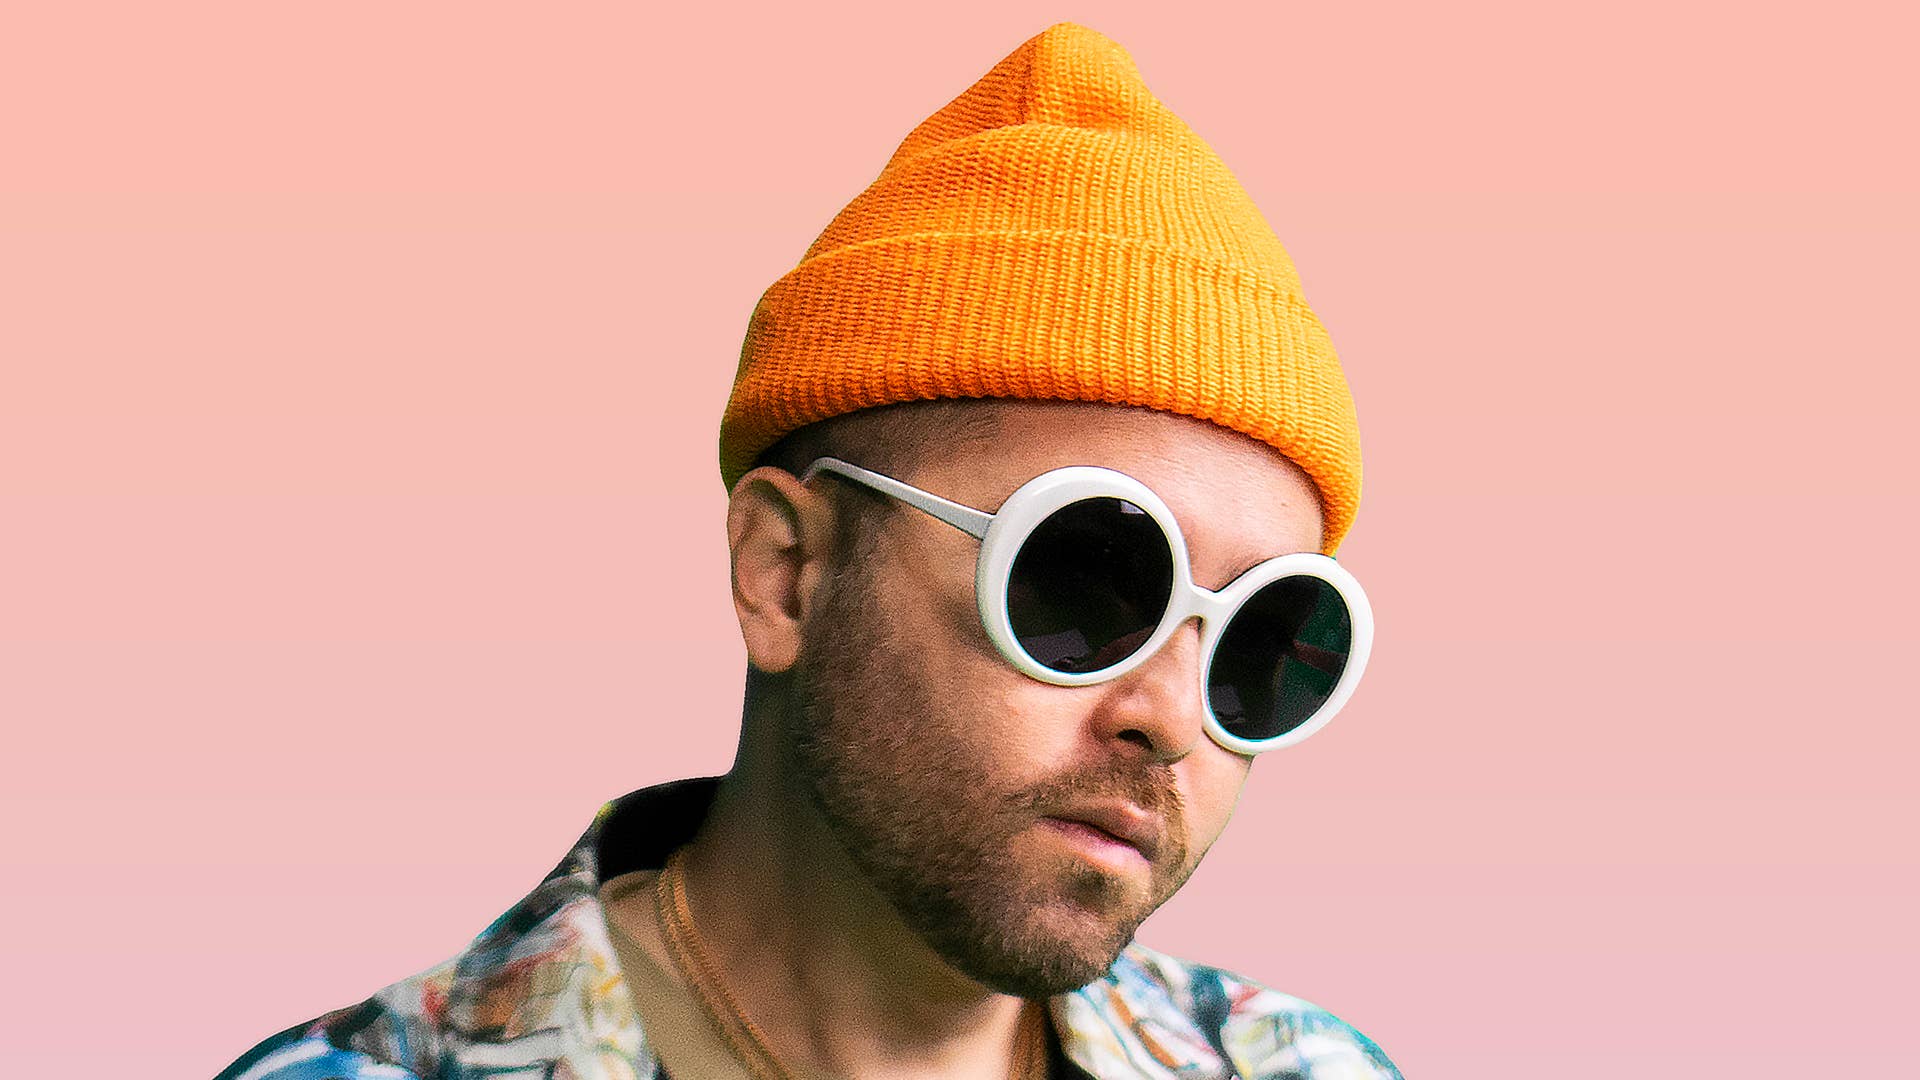 Grandtheft posing in an orange beanie and white shades for his new EP Wild Ways.